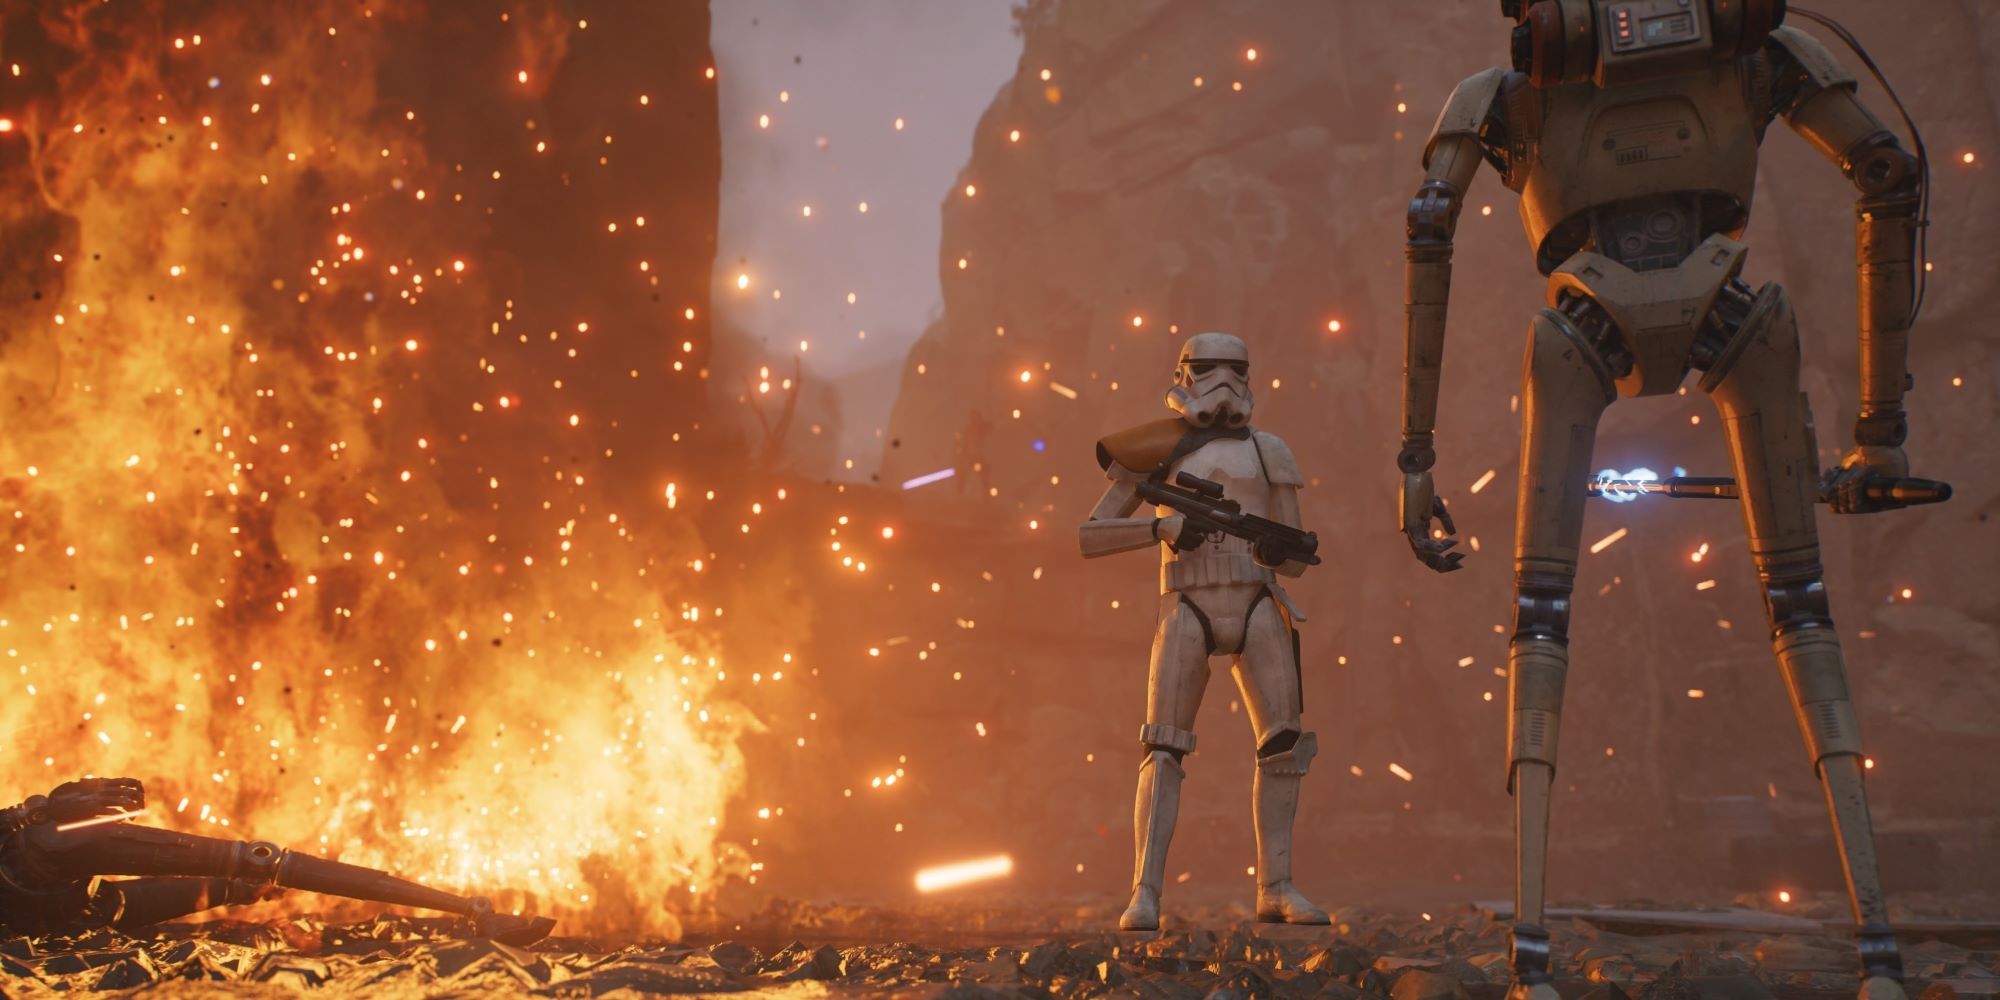 STAR WARS Jedi_ Survivor Stormtroopers surrounded by fire